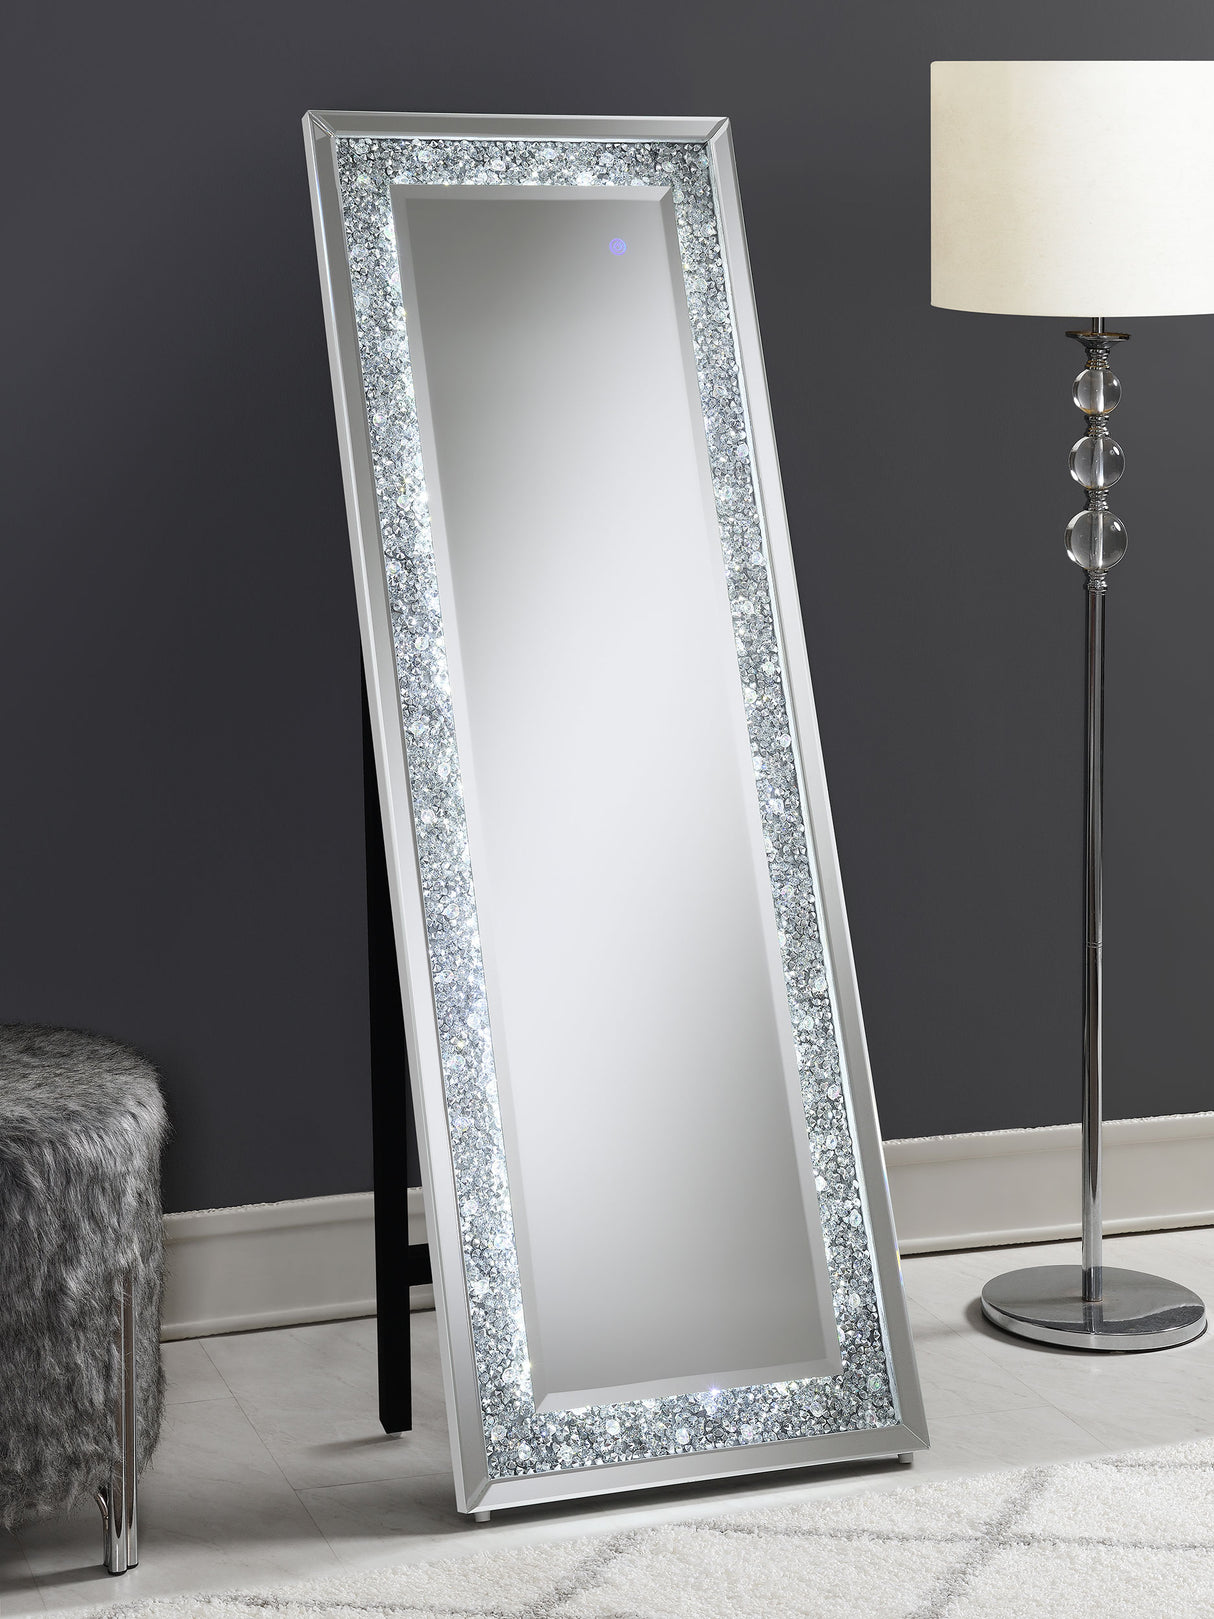 Standing Mirror - Carisi Rectangular Standing Mirror with LED Lighting Silver